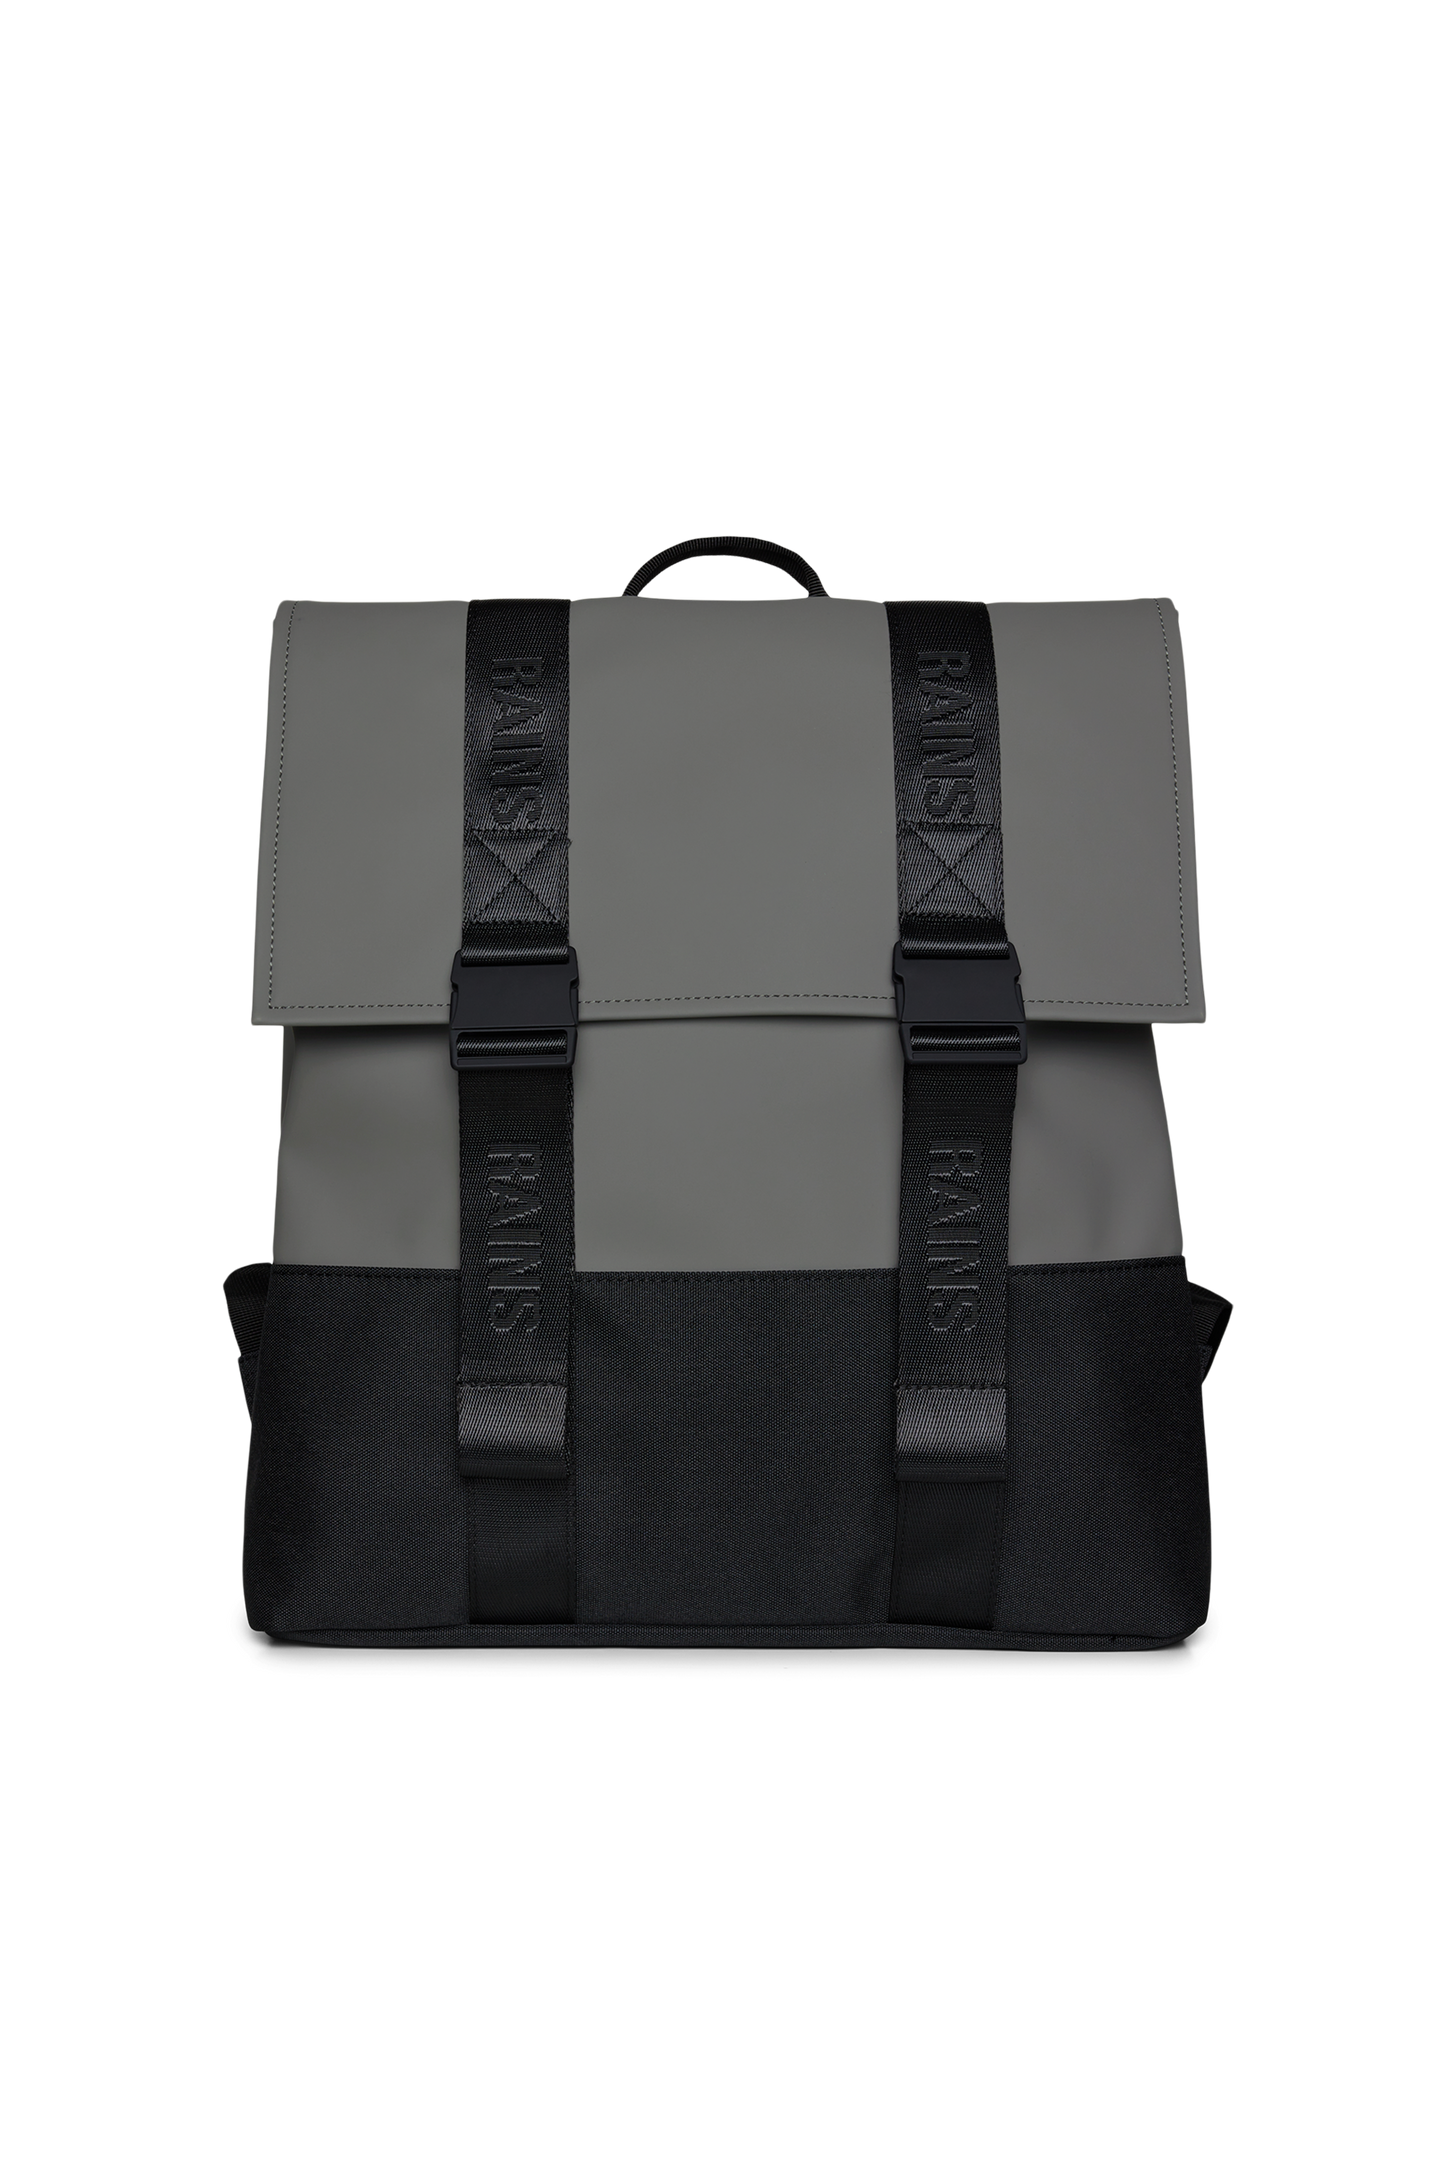 Rains square backpack, featuring two black straps along the front of the bag.